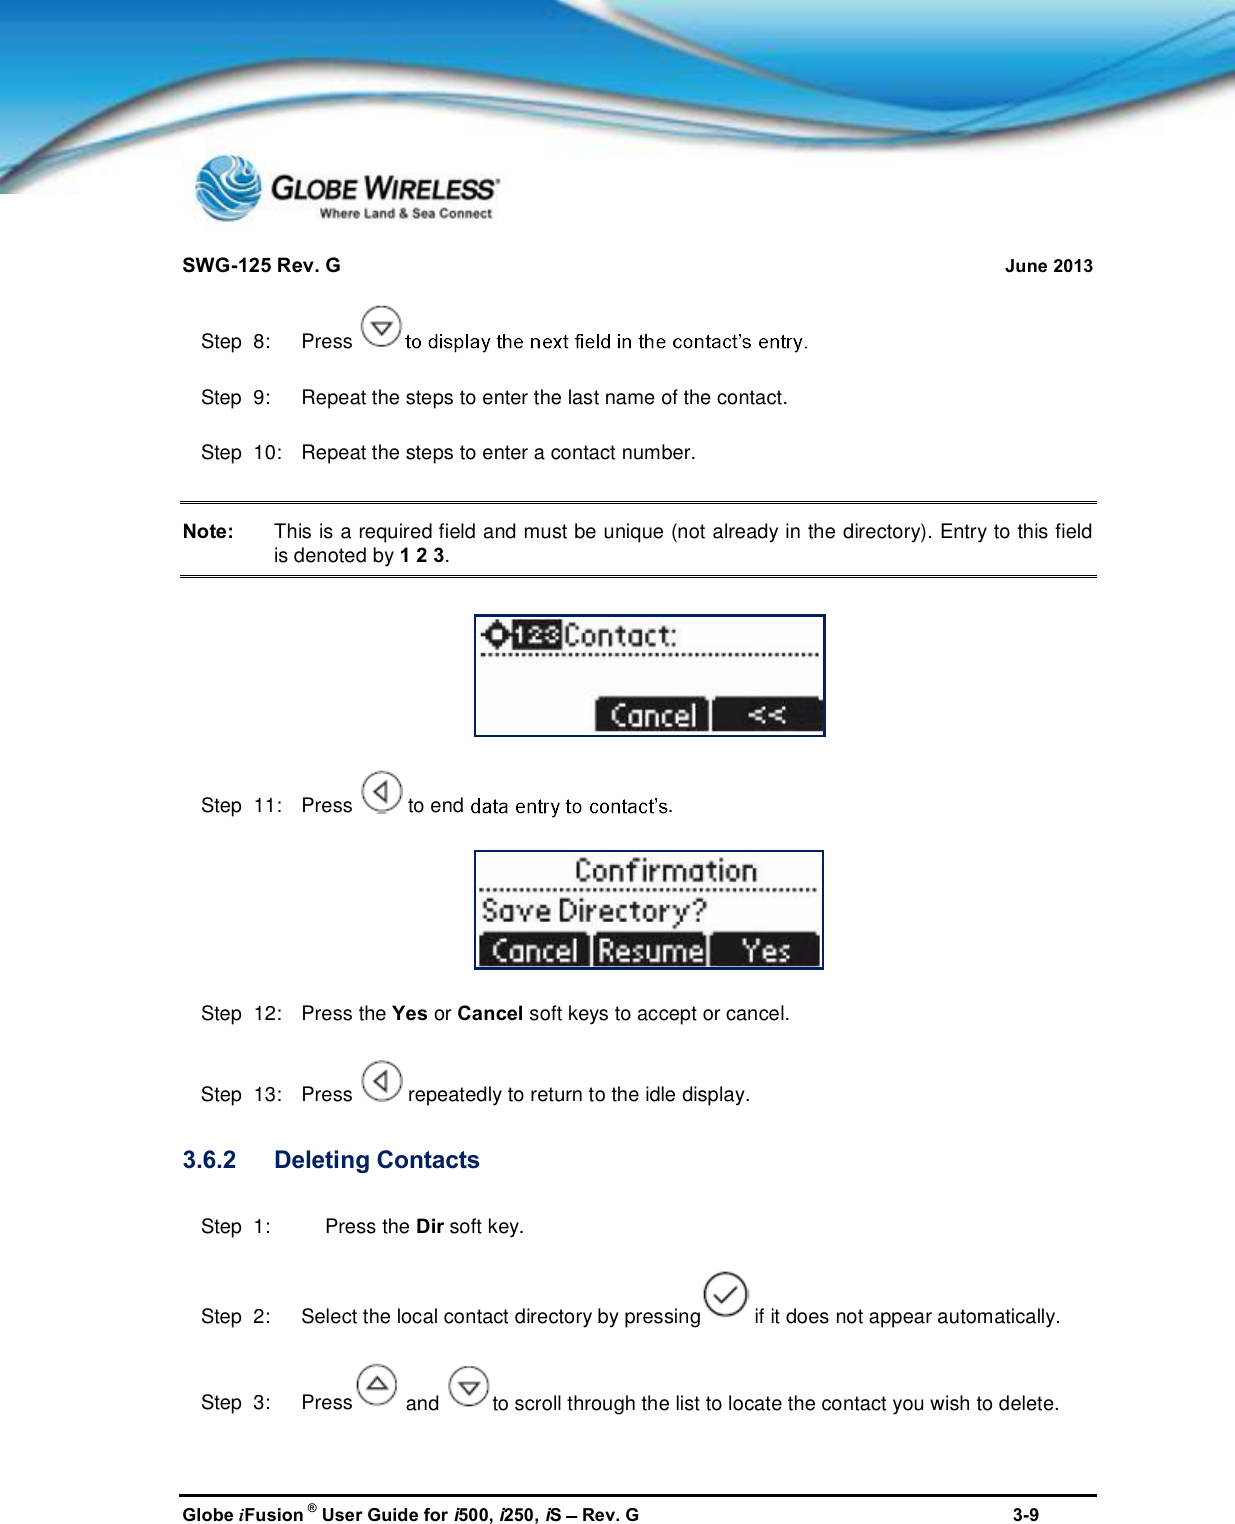 SWG-125 Rev. G June 2013Globe iFusion ®User Guide for i500, i250, iSRev. G 3-9Step  8:   PressStep  9:   Repeat the steps to enter the last name of the contact.Step  10:   Repeat the steps to enter a contact number.Note: This is a required field and must be unique (not already in the directory). Entry to this fieldis denoted by 1 2 3.Step  11:   Press to end .Step  12:   Press the Yes or Cancel soft keys to accept or cancel.Step  13:   Press repeatedly to return to the idle display.3.6.2 Deleting ContactsStep  1: Press the Dir soft key.Step  2:   Select the local contact directory by pressing if it does not appear automatically.Step  3:   Press and to scroll through the list to locate the contact you wish to delete.